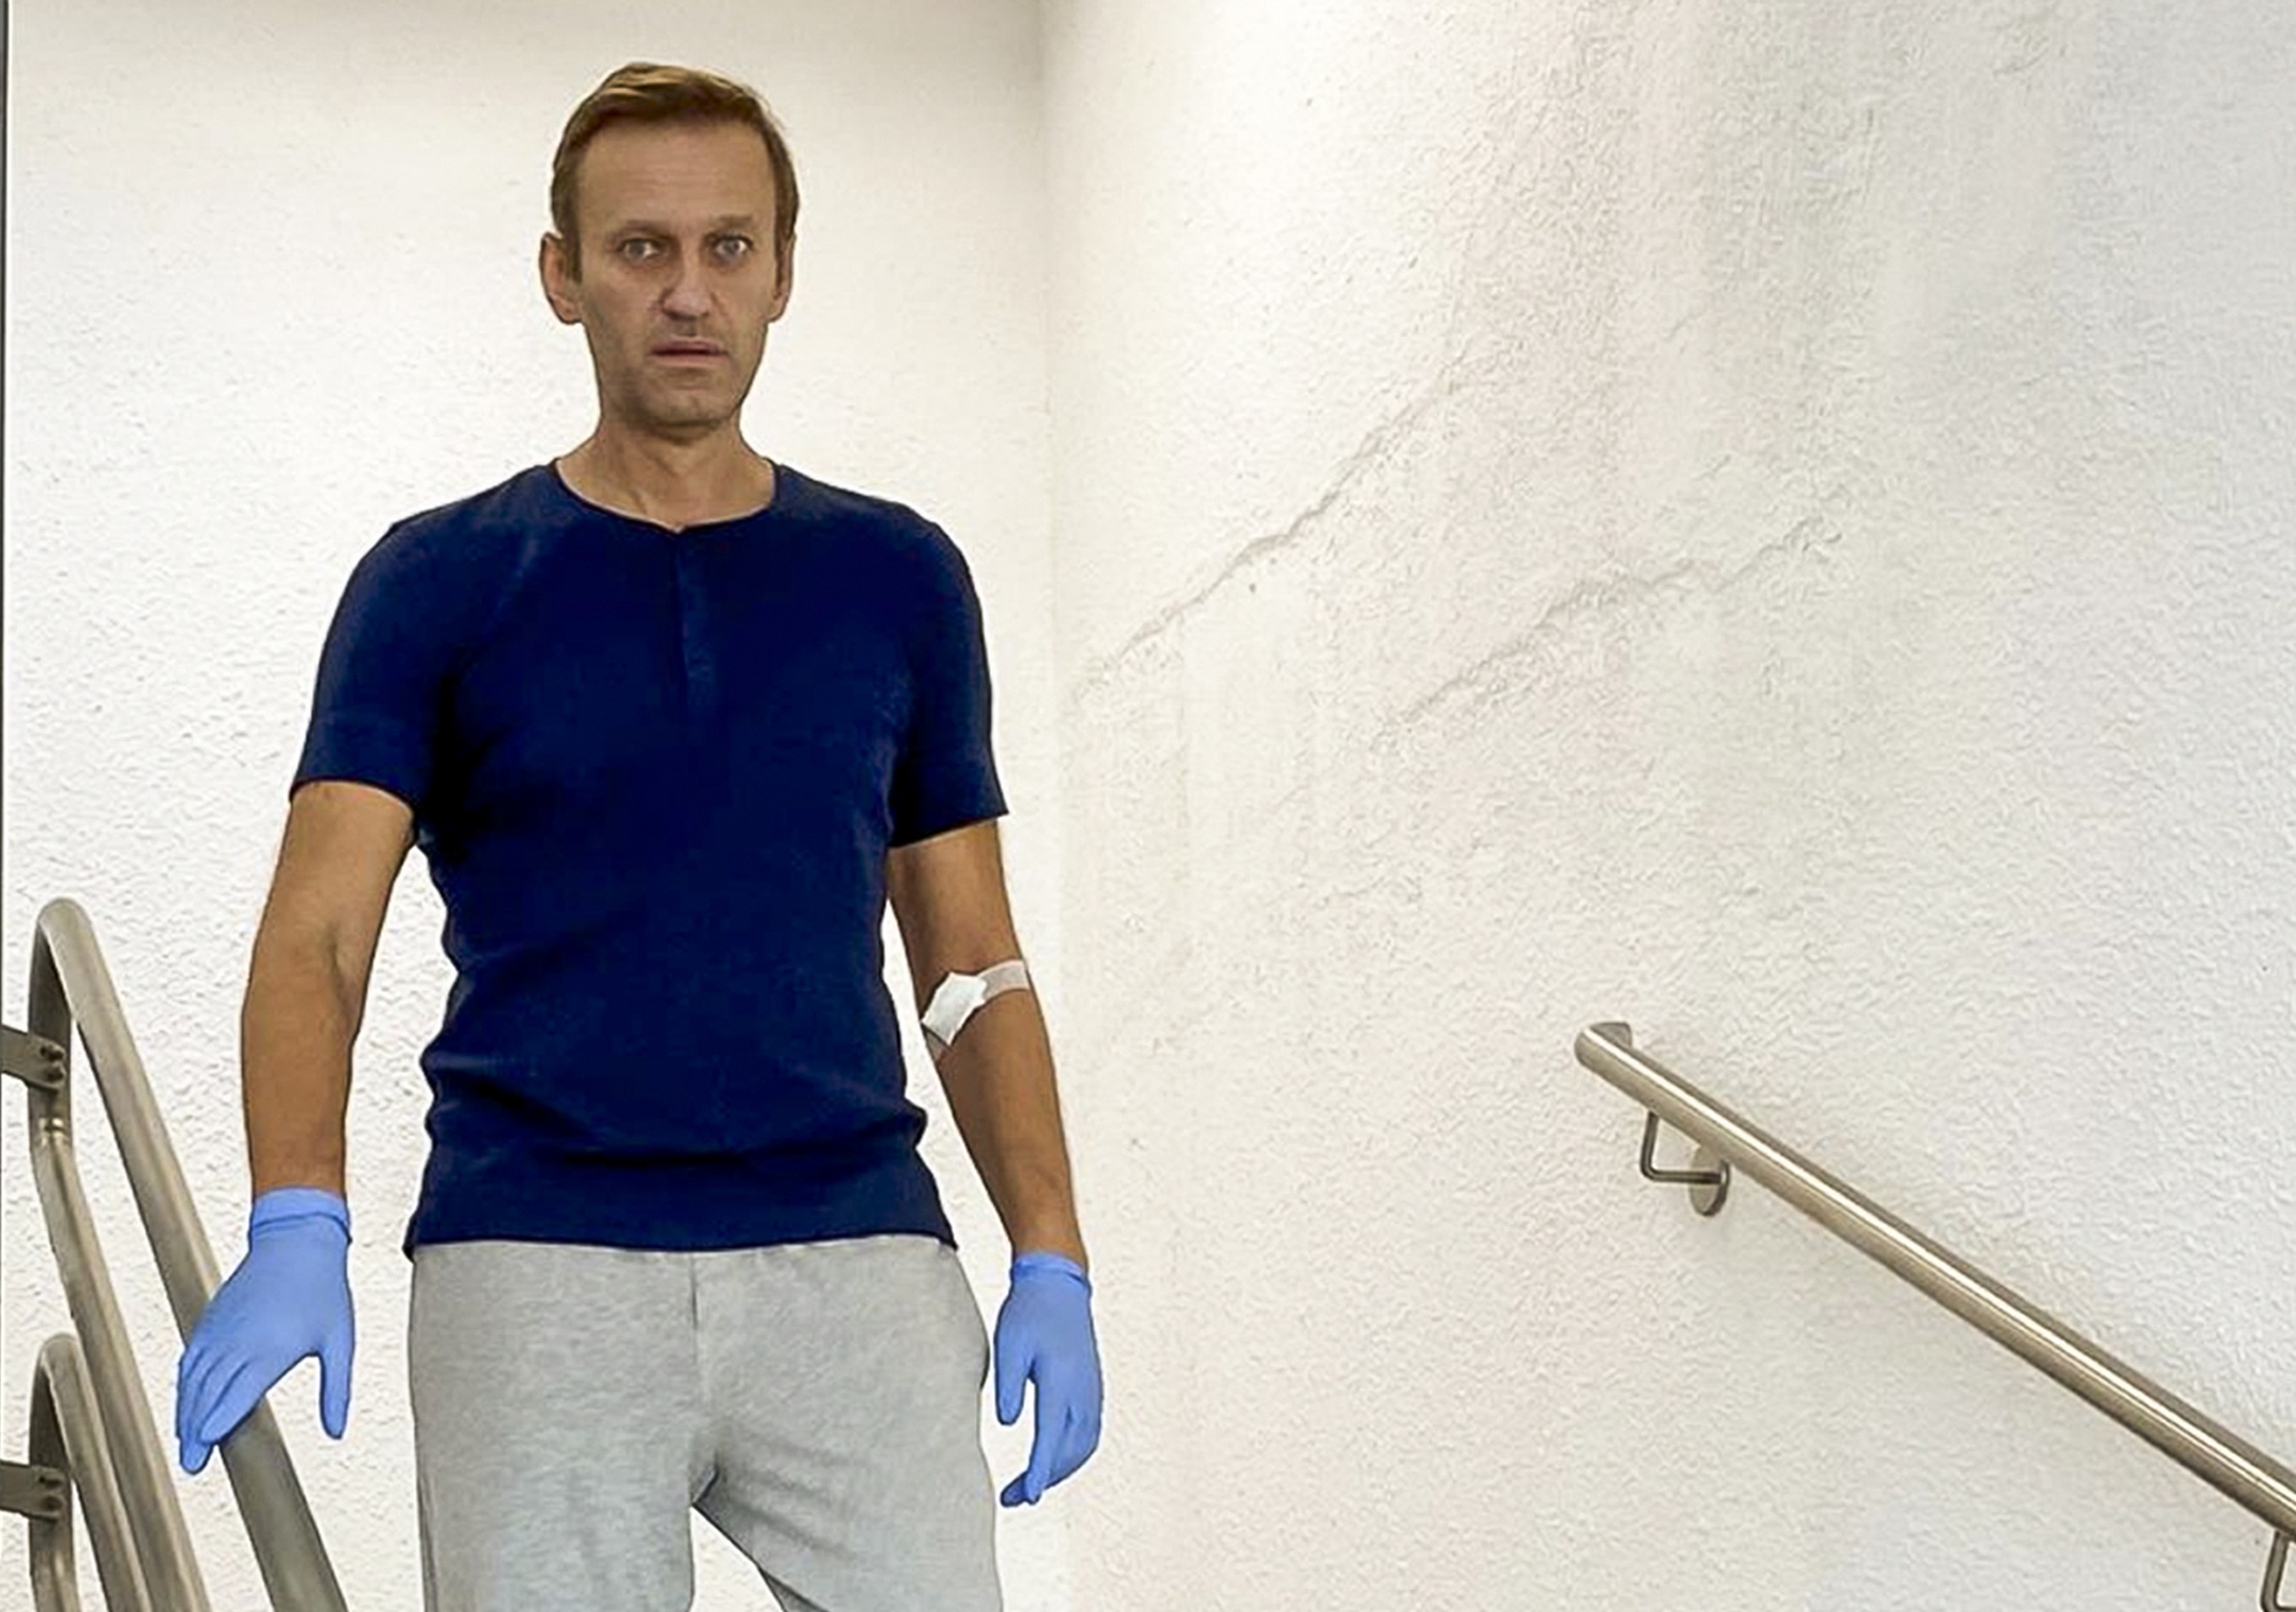 Russian opposition leader Alexei Navalny walks down stairs in a hospital in Berlin, Germany 